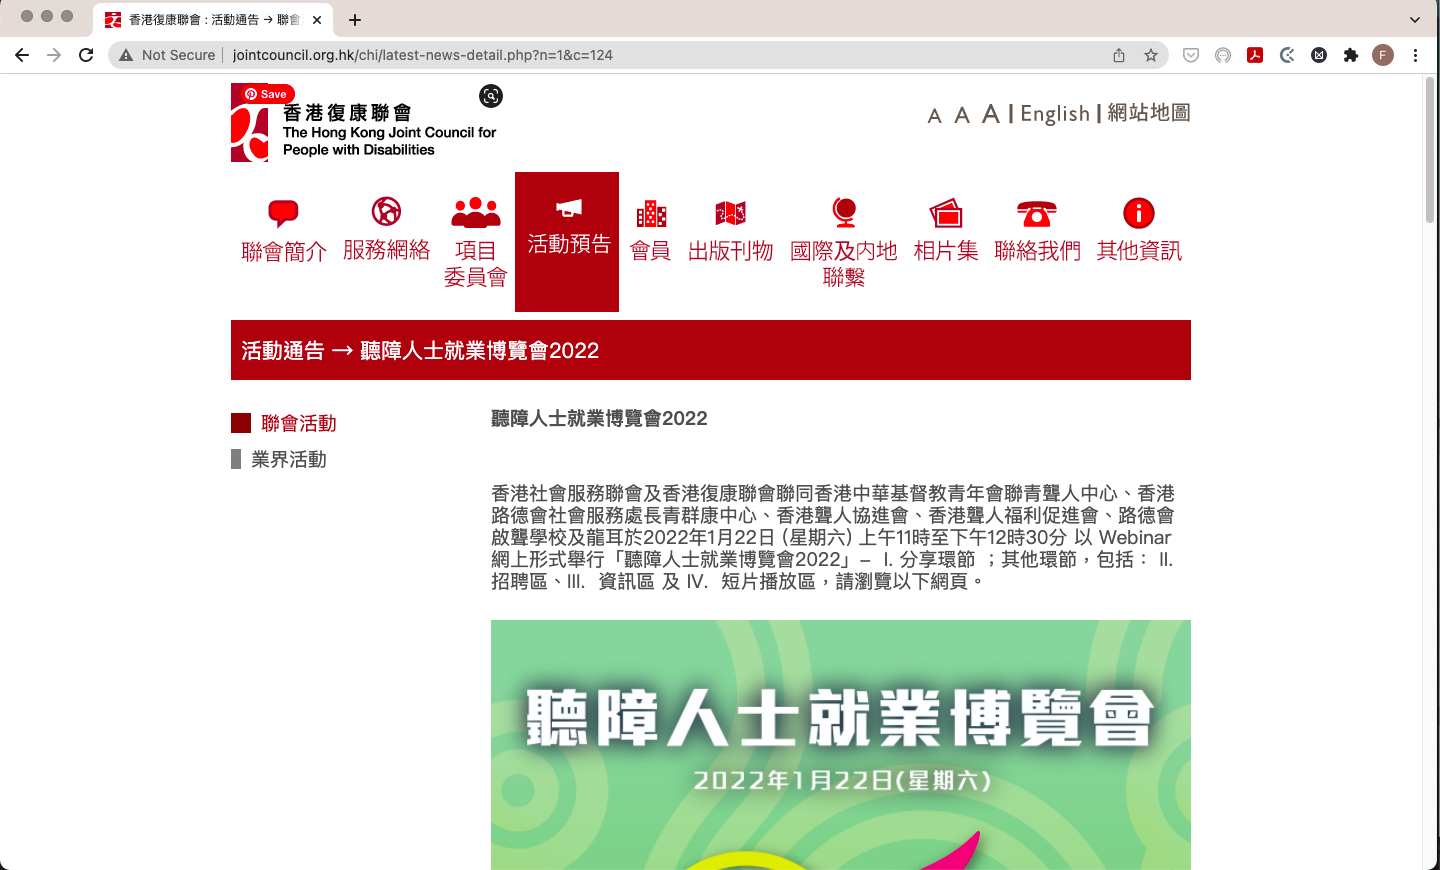 HKJCPWD-expo2022 frontpage.png